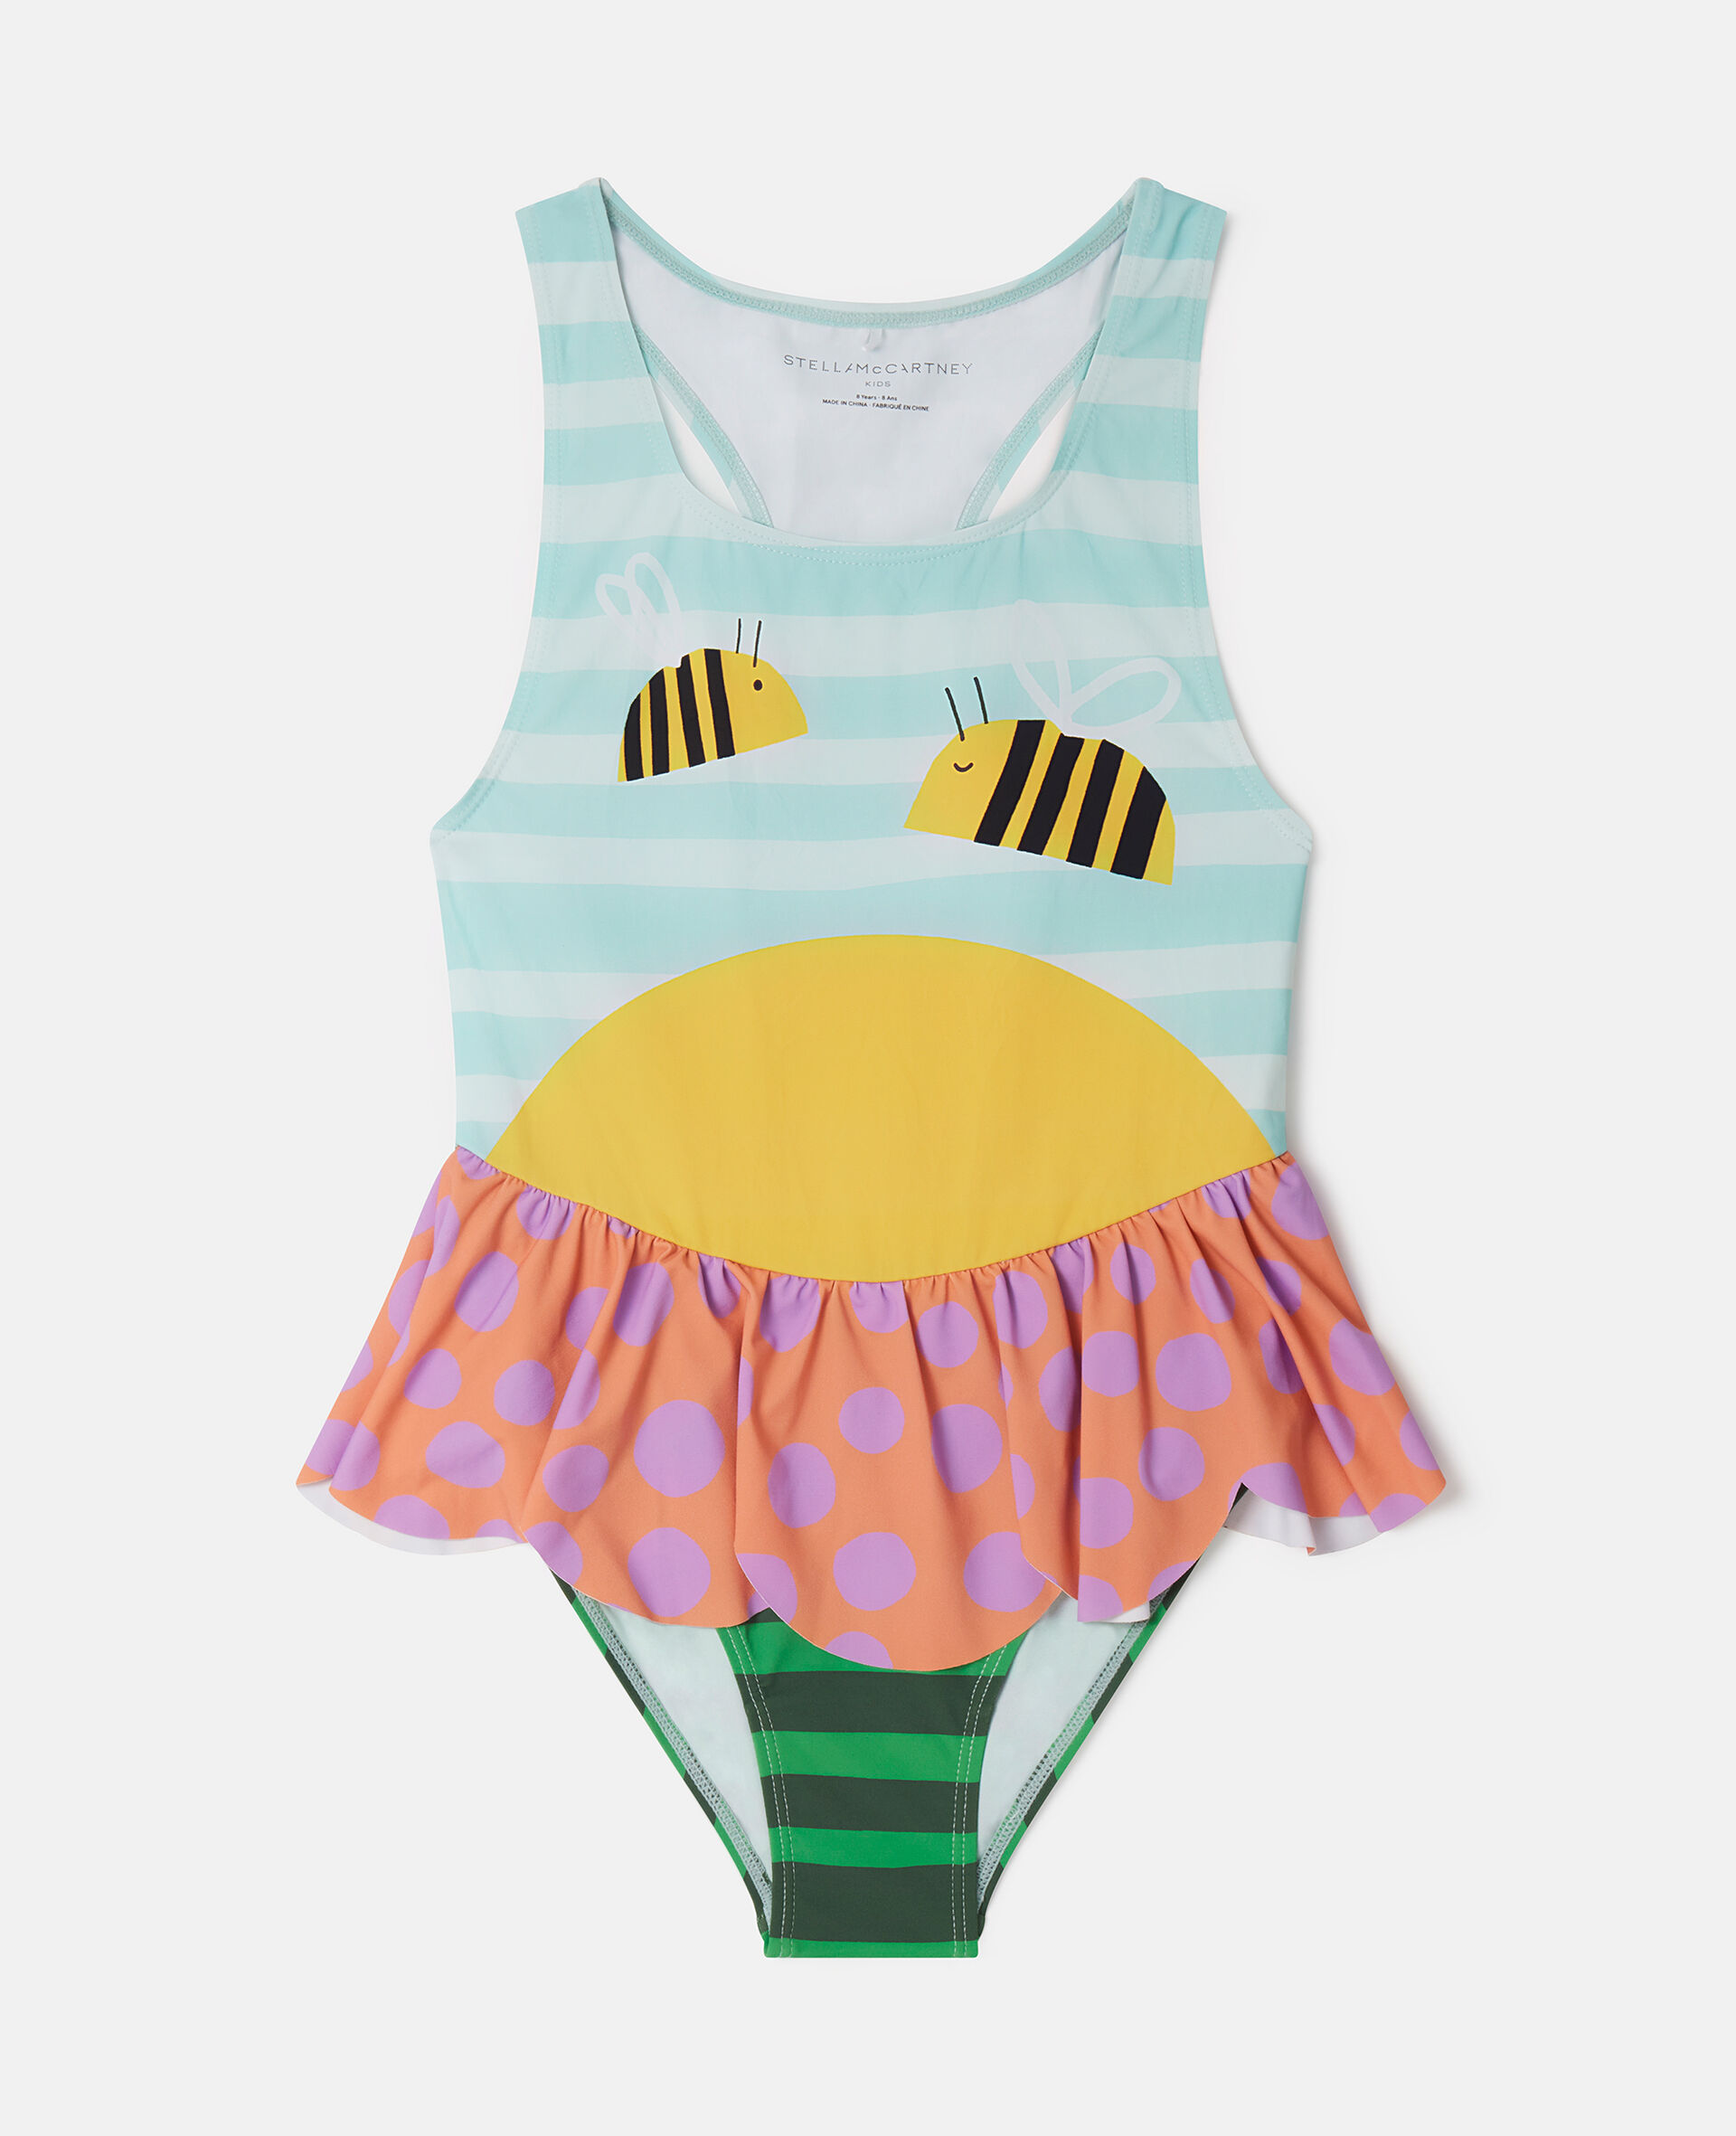 Bumblebee Landscape Print Swimsuit-Multicolored-large image number 0